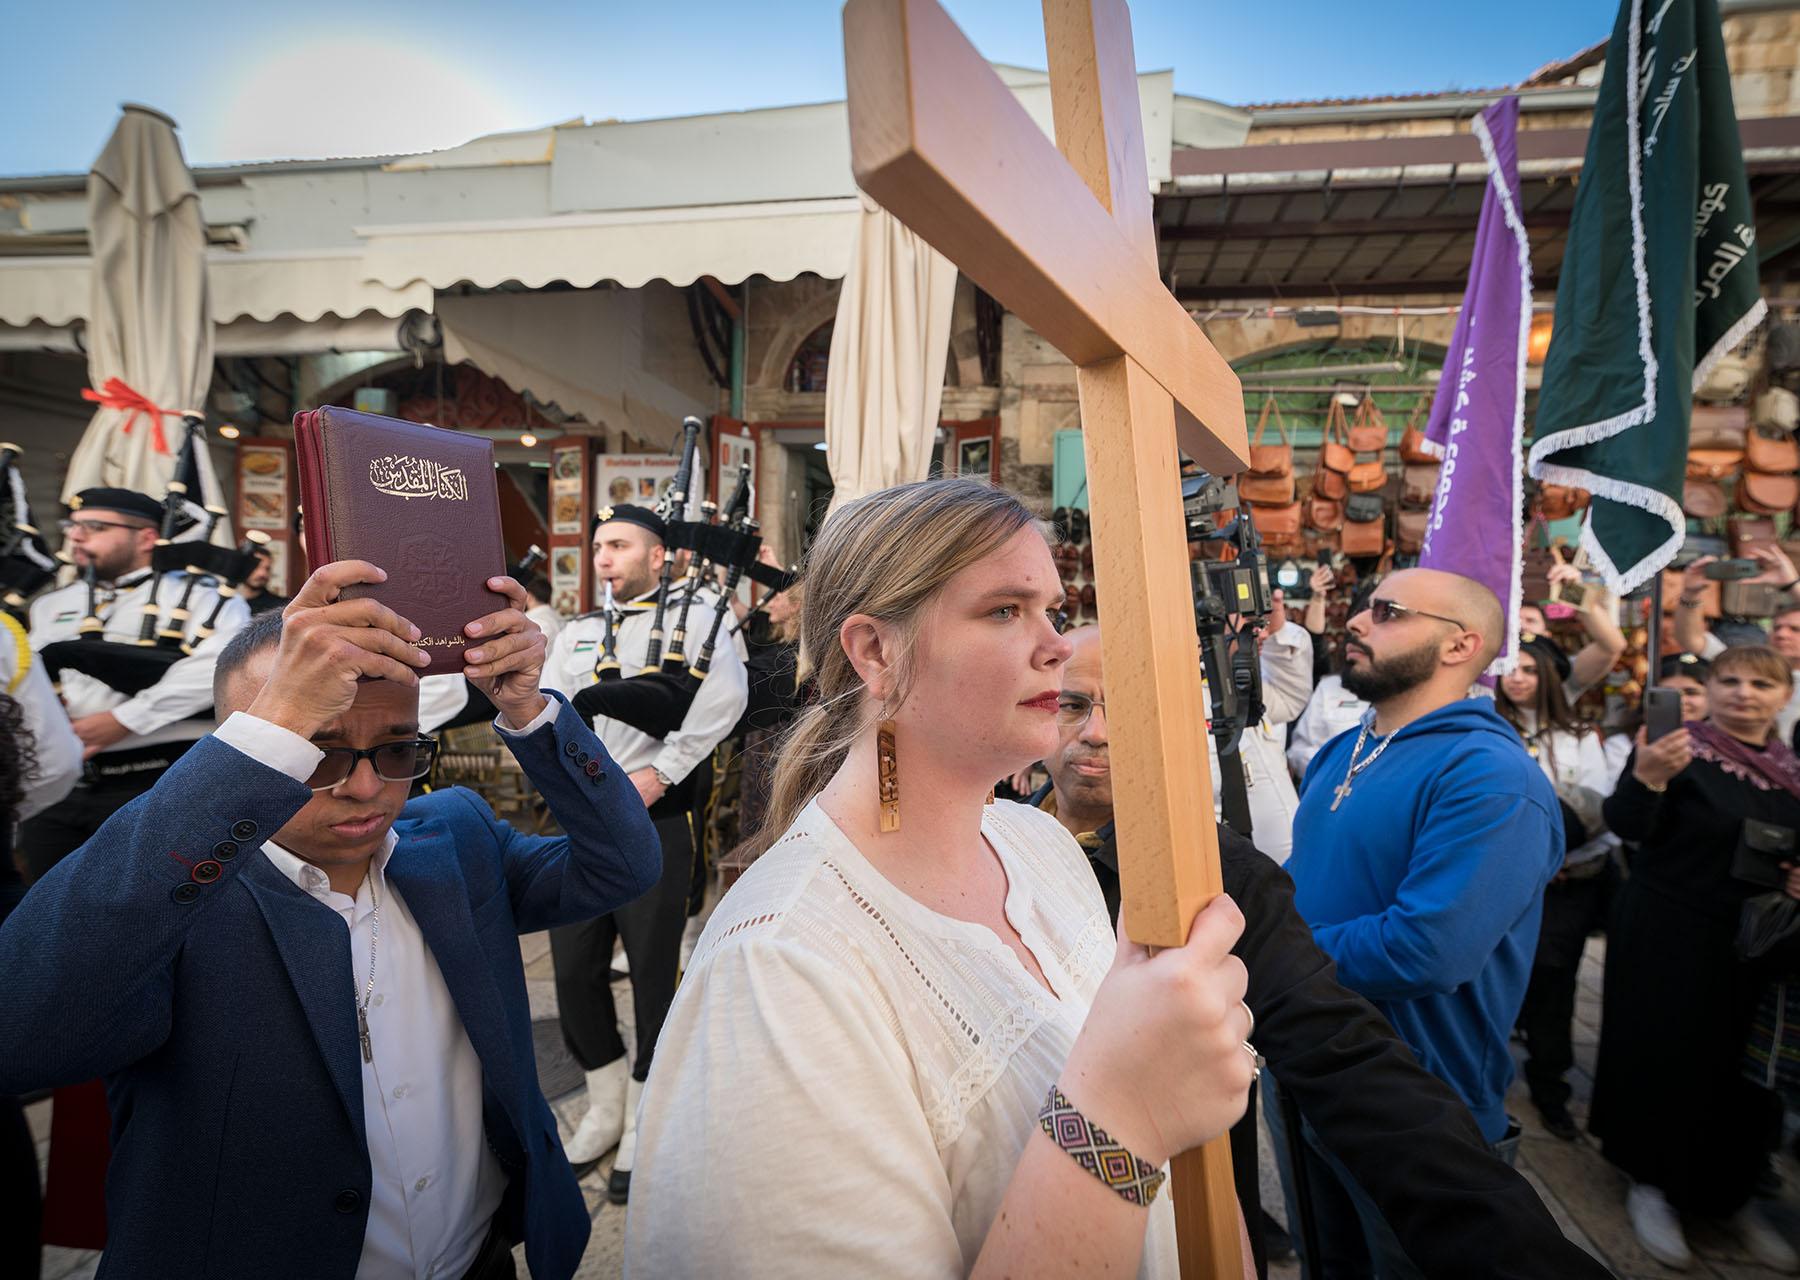 A woman leads the procession into the Lutheran Church of the Redeemer, Jerusalem, for the ordination service for Sally Azar of the Evangelical Lutheran Church in Jordan and the Holy Land, on 22 January 2023. The LWF voiced deep concern about the siituations of Christians in the Holy Land. Photo: LWF/Albin Hillert